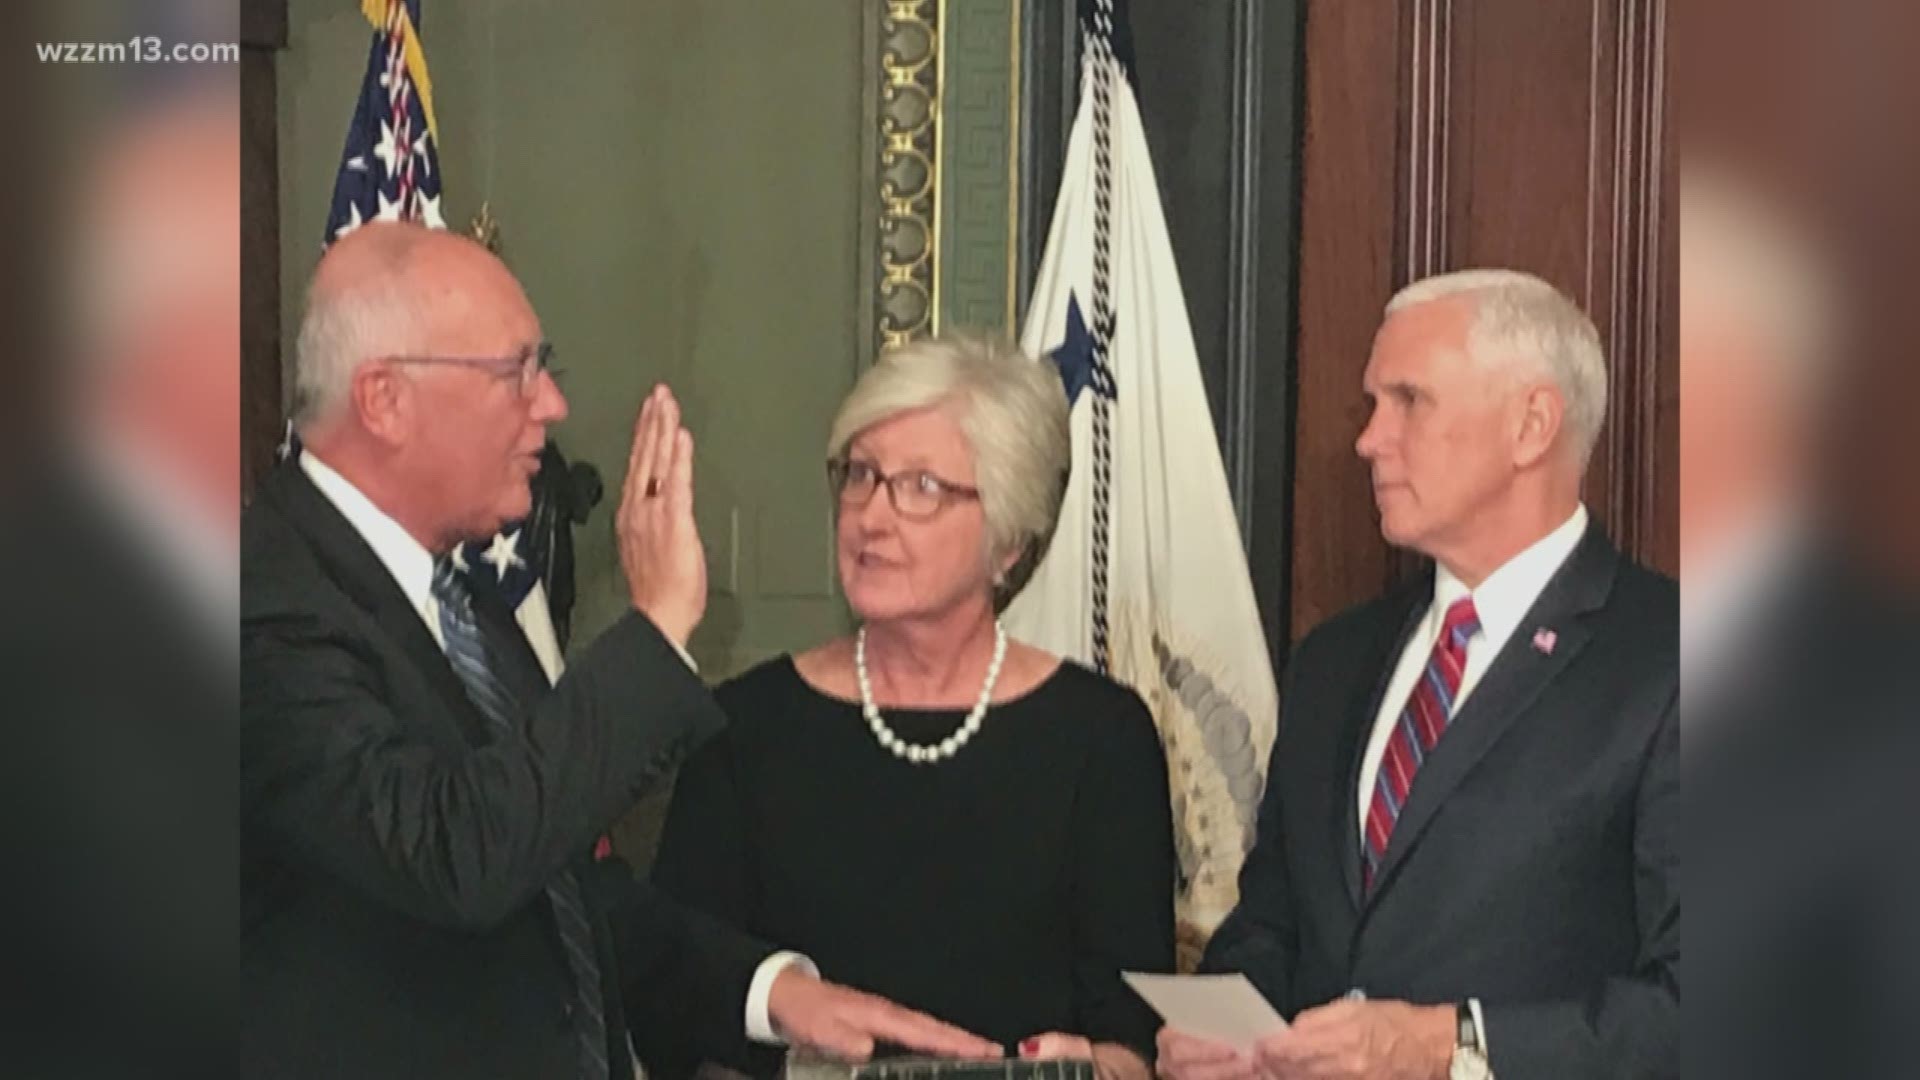 Pete Hoekstra swore in as the new ambassador to the Netherlands.